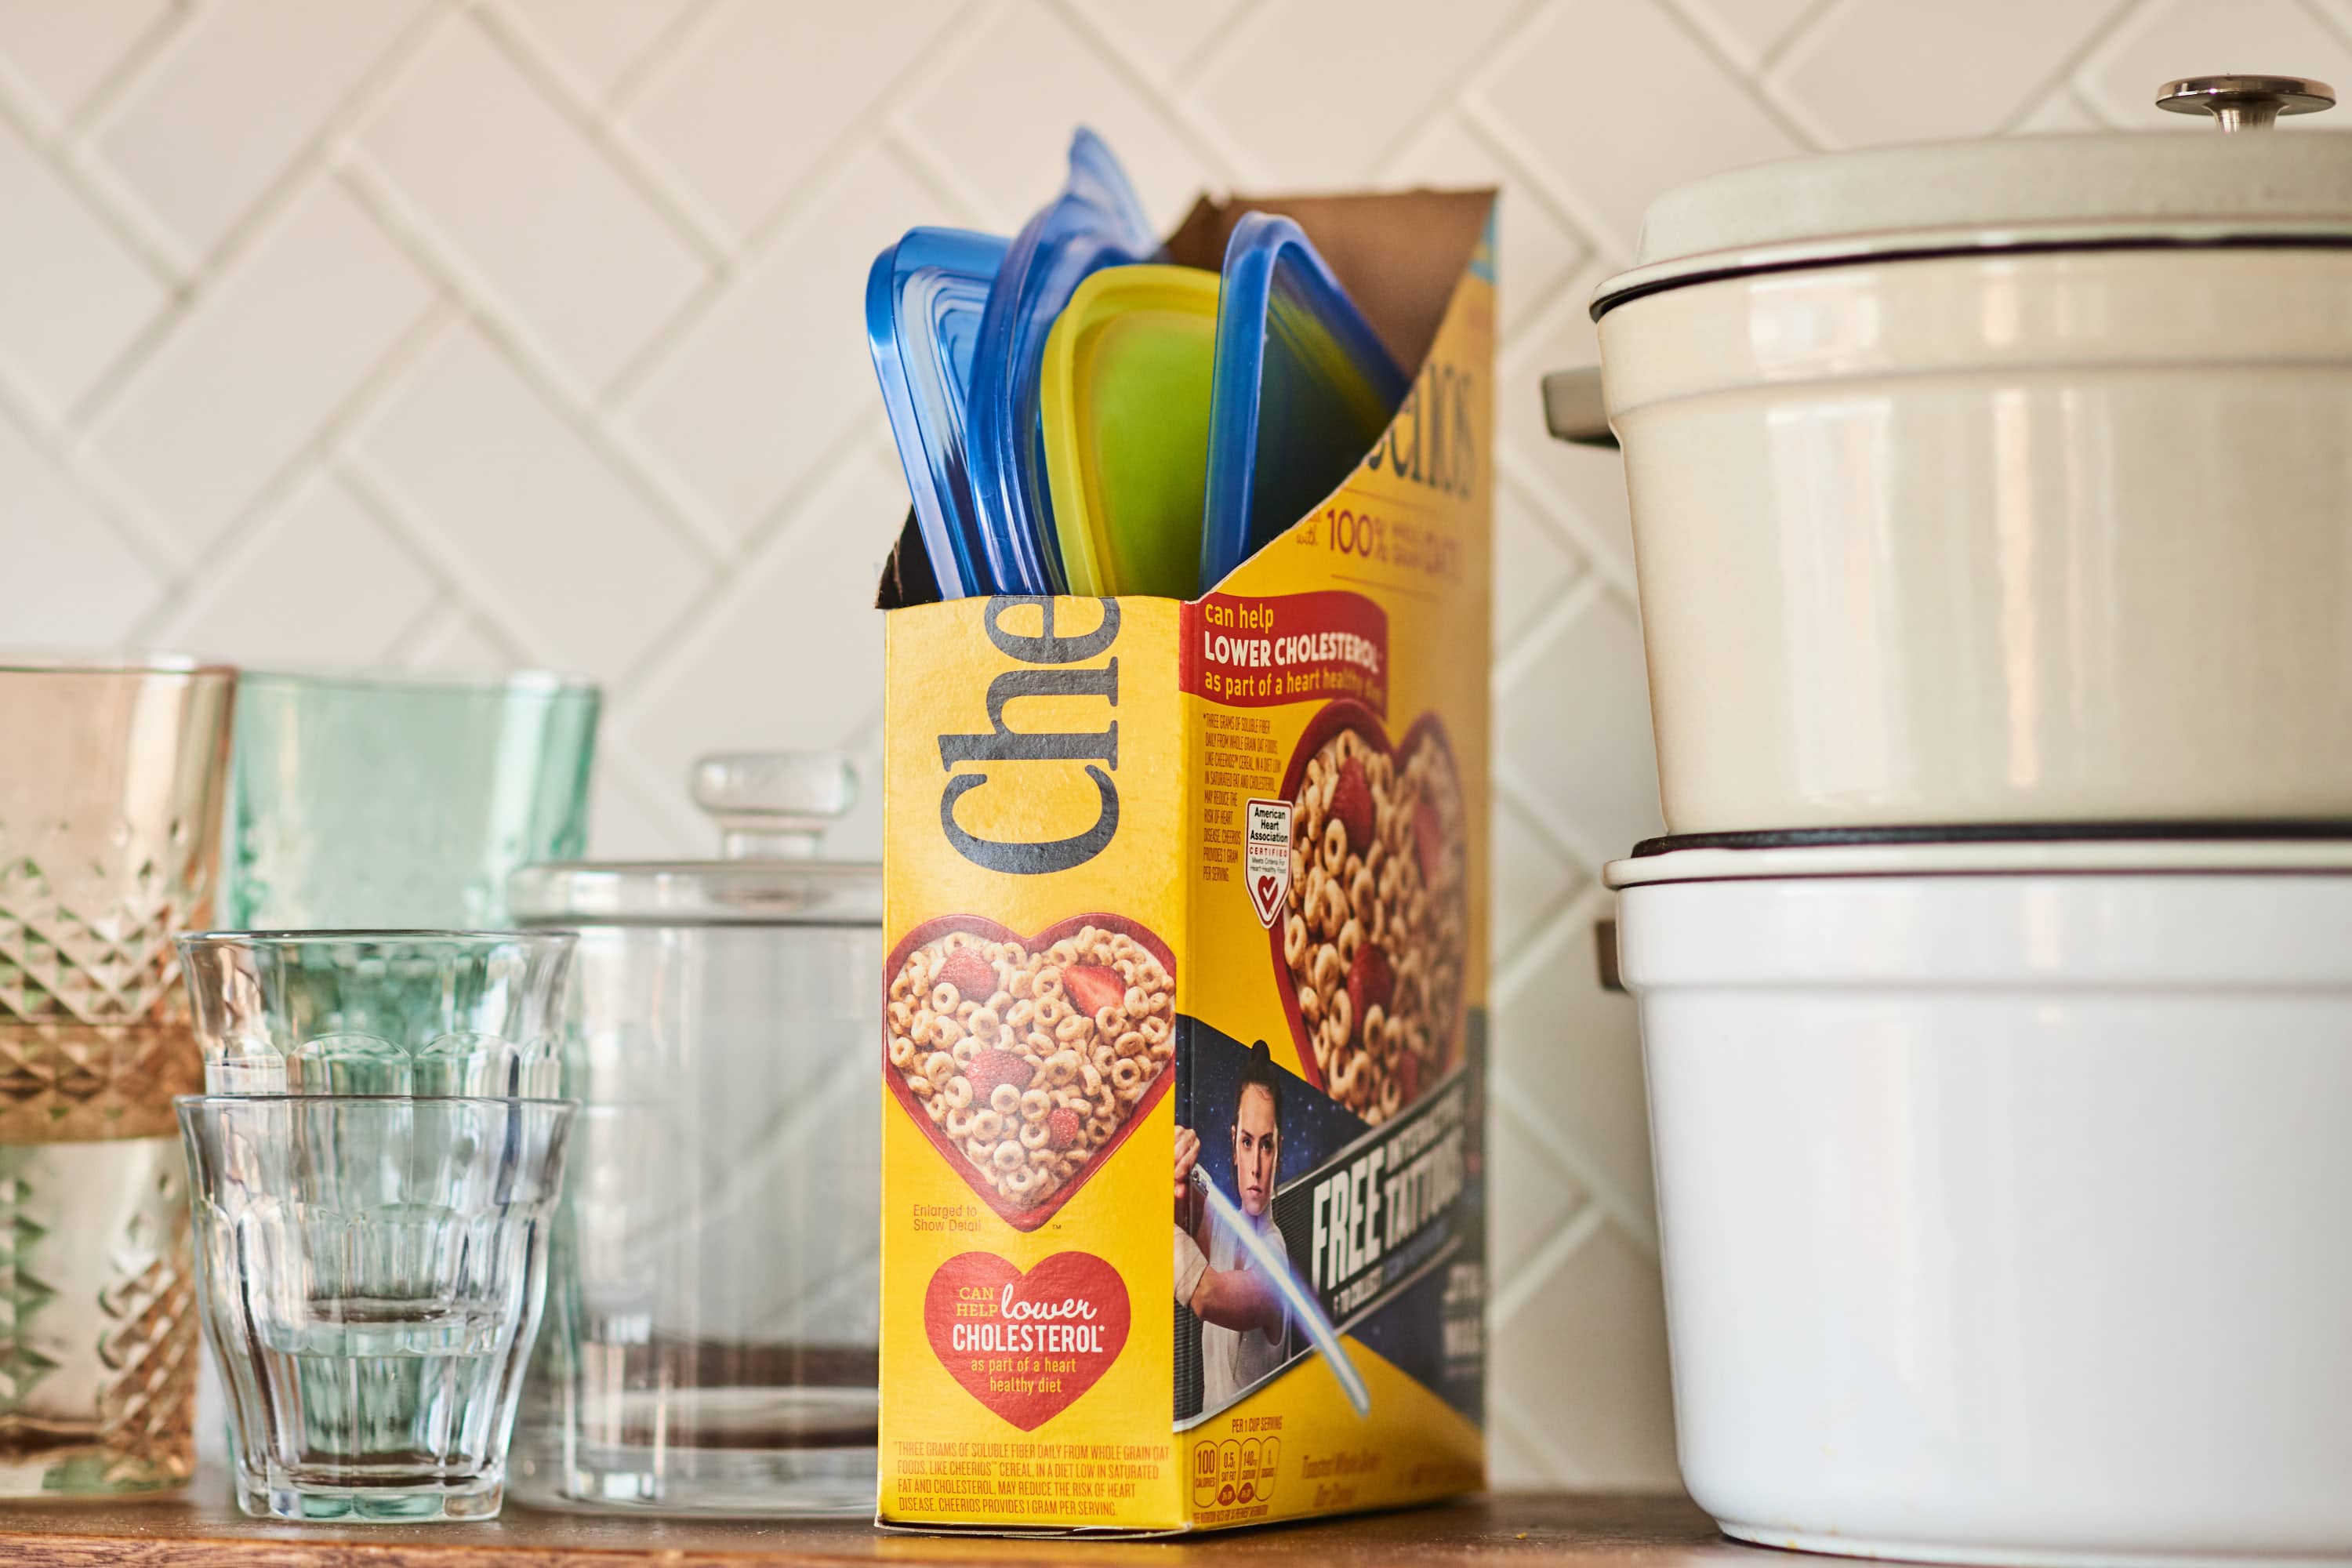 12 Clever Tupperware Organization Ideas to Keep Clutter at Bay